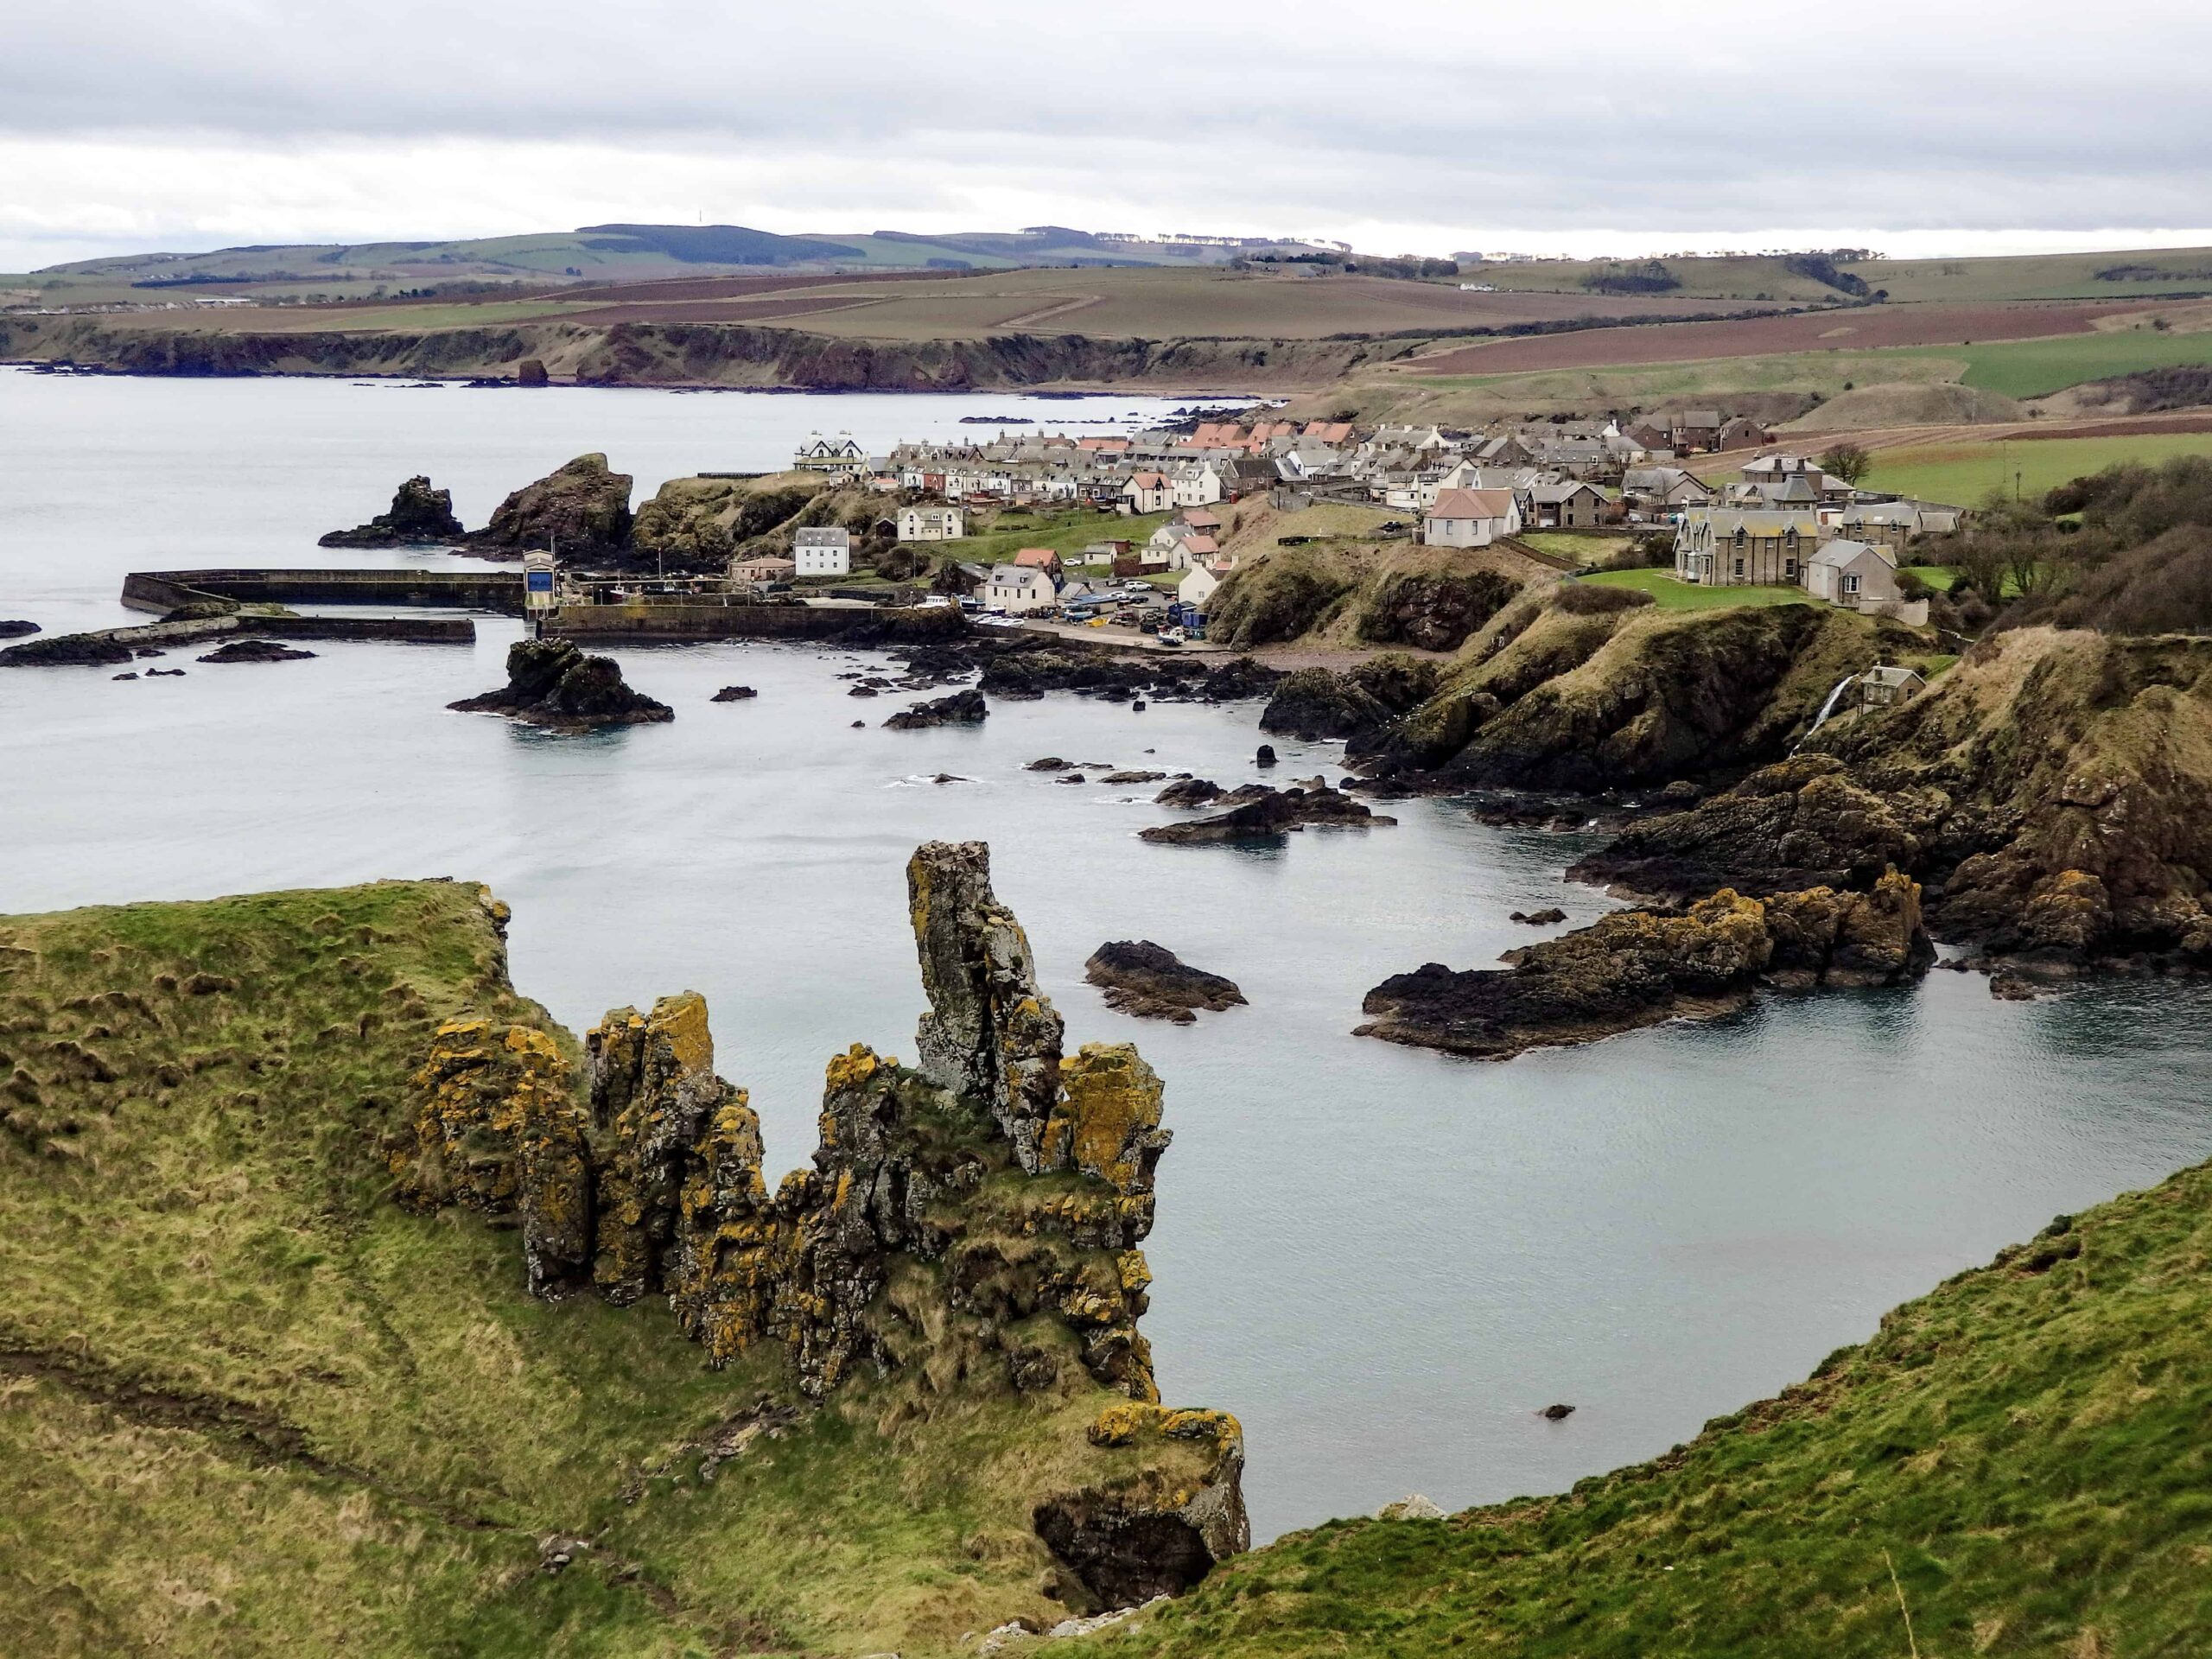 How to visit St Abbs, Scottish Borders